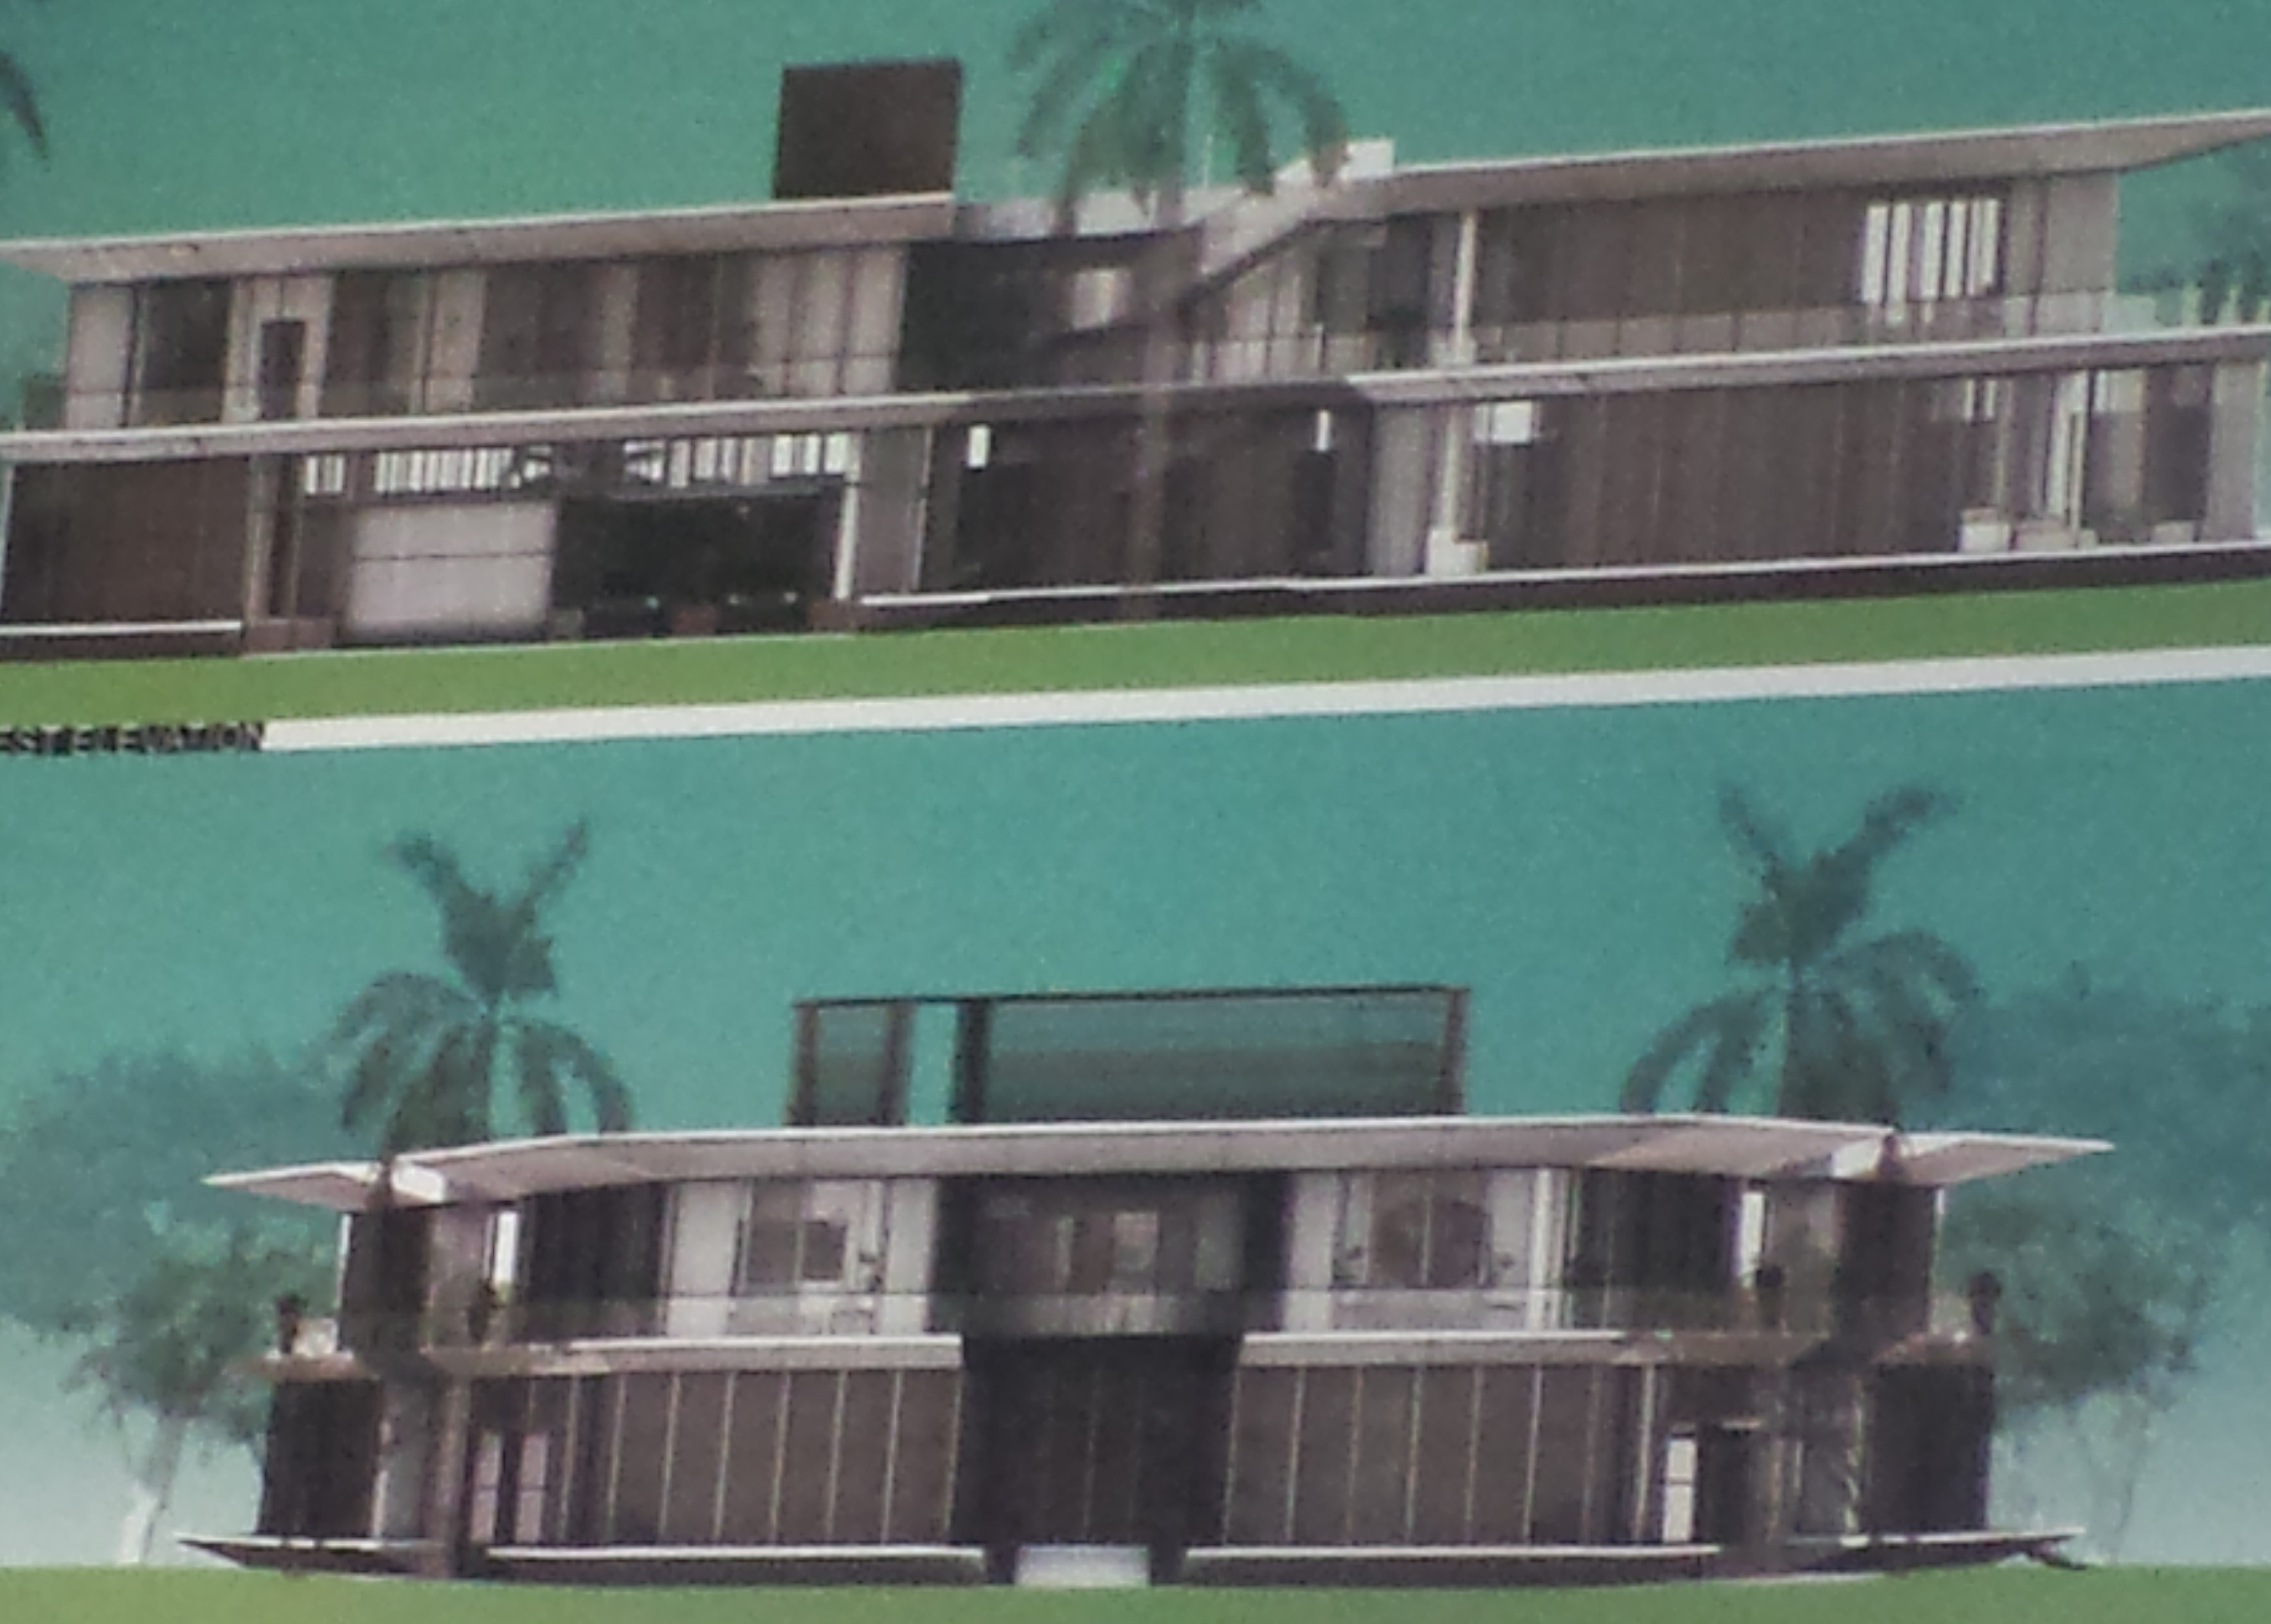 Renderings of Shay Kostiner's proposed mansion at 44 Star Island (Credit: Ricardo Bofill)